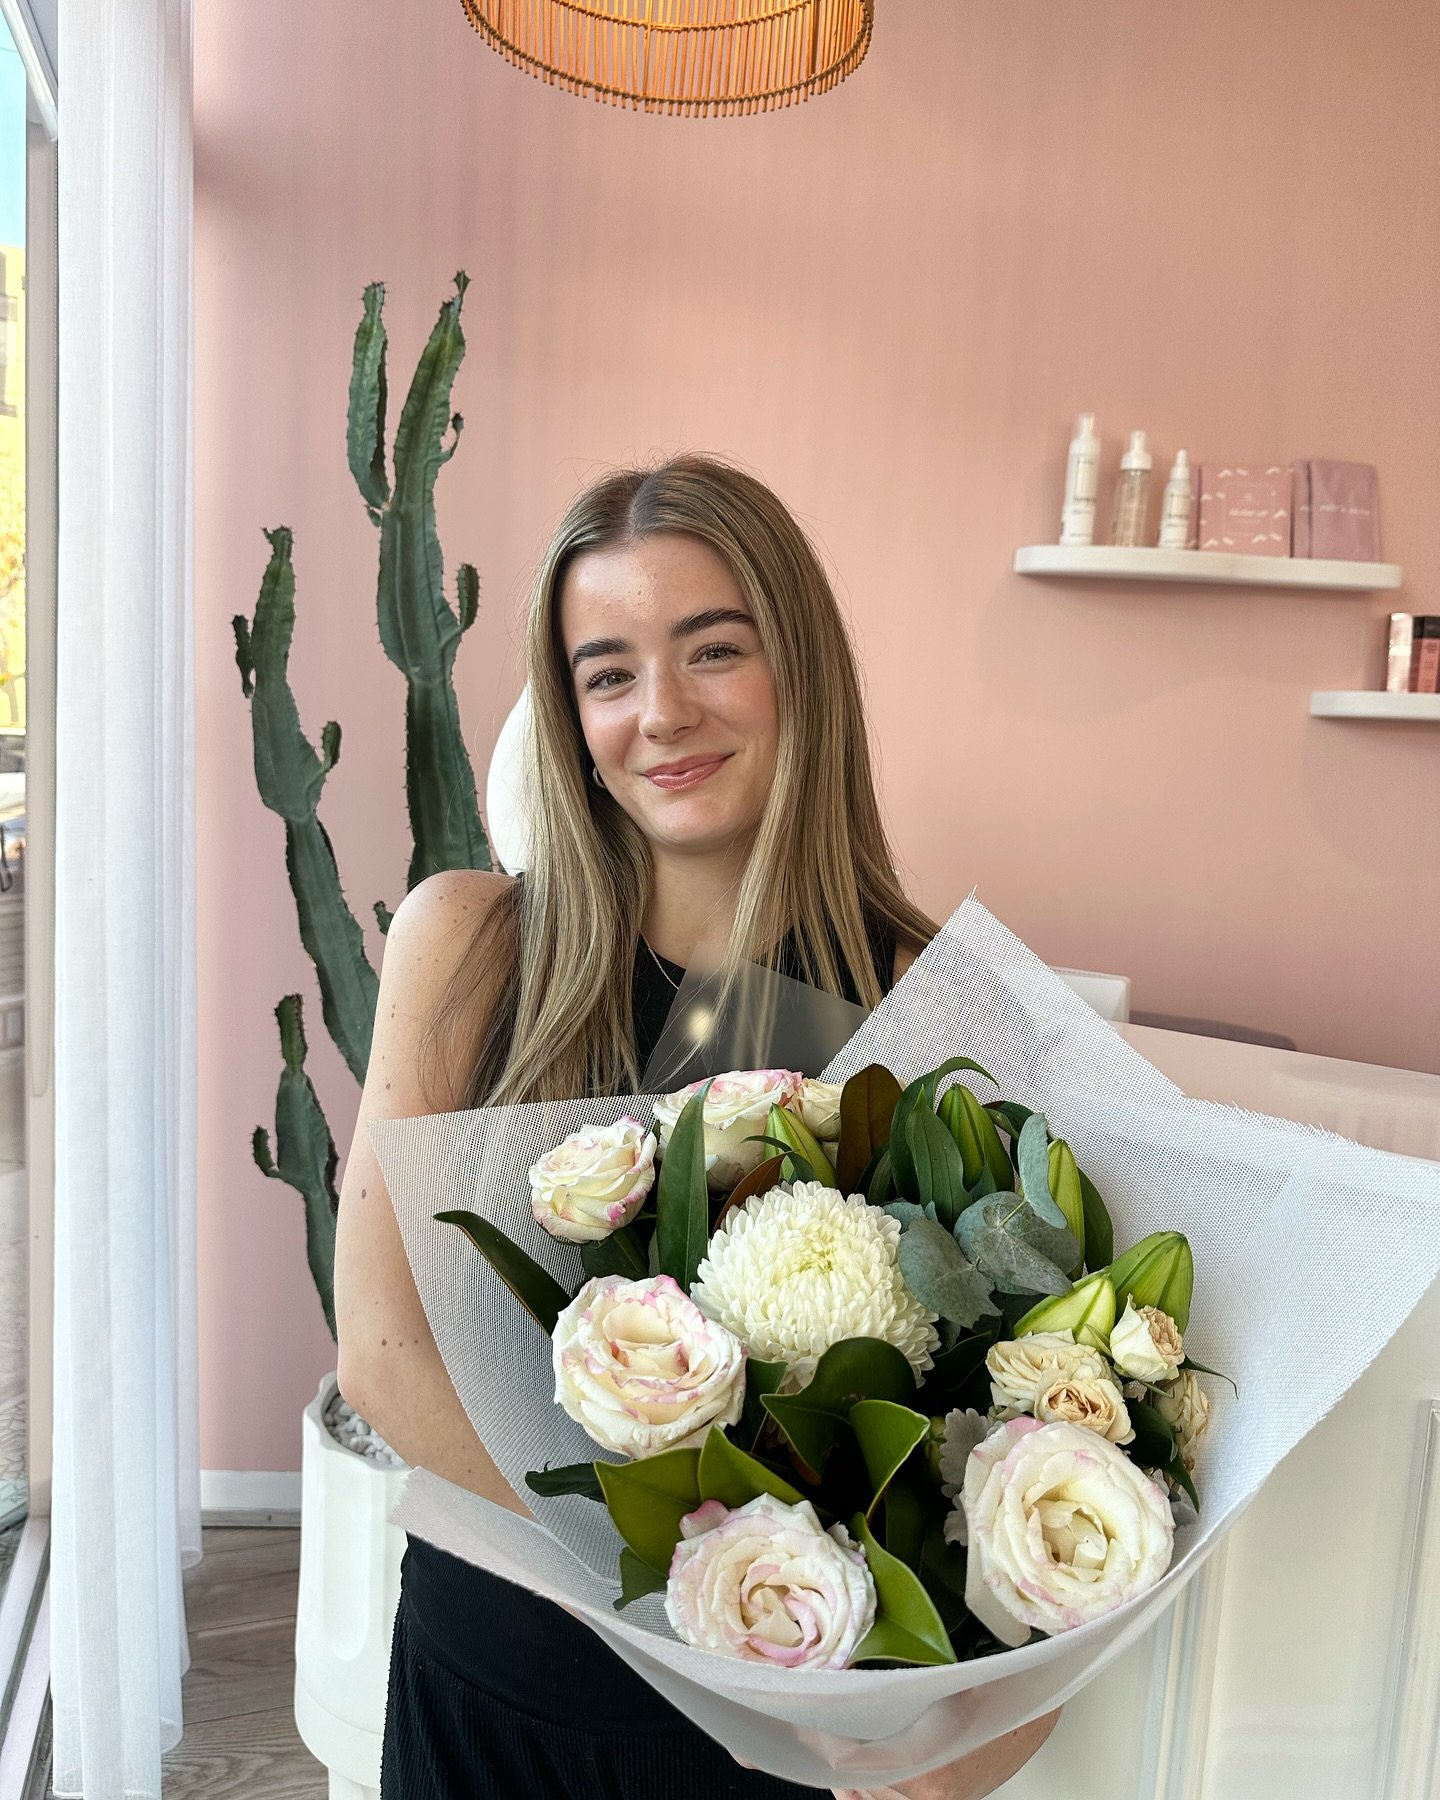 A BIG congratulations to our girl Chloe for completing her diploma of Beauty therapy at Elly Lukas! 👏

Chloe has been with us for 10 months now and everyday I&rsquo;m amazed by how talented she is!

My little superstar 💖